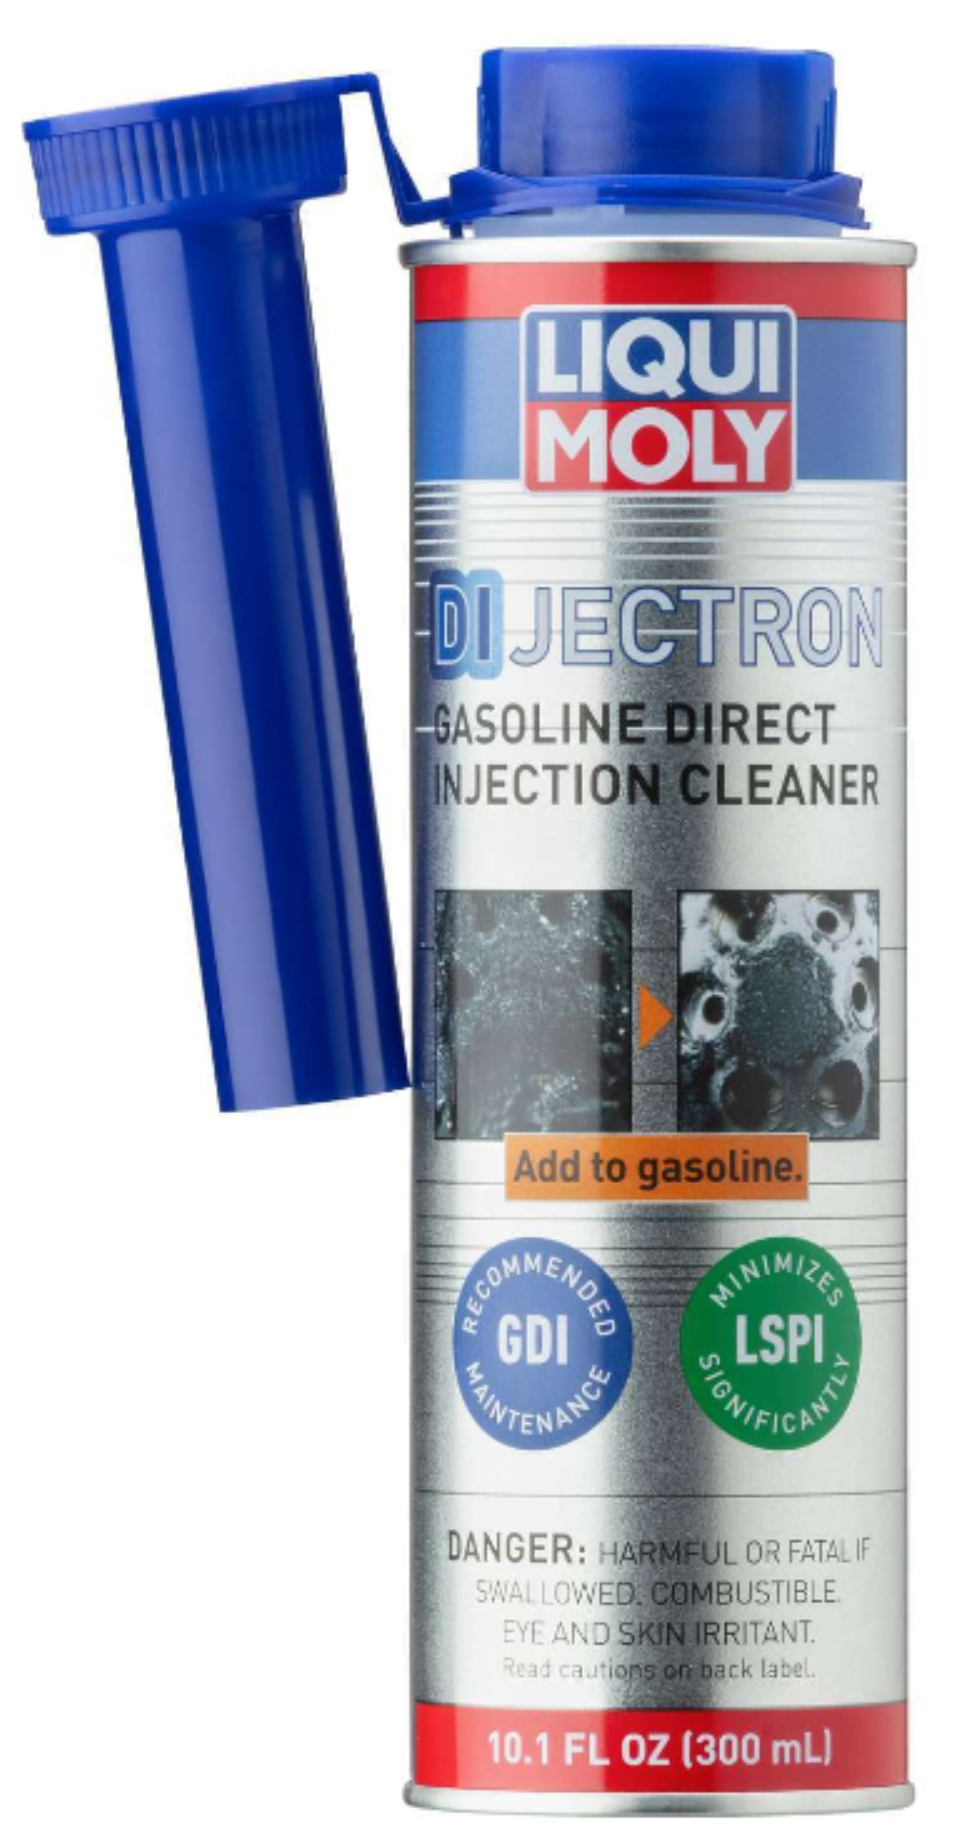 LiquiMoly LM22110 (Fuel Additive DI Jectron) 300ml